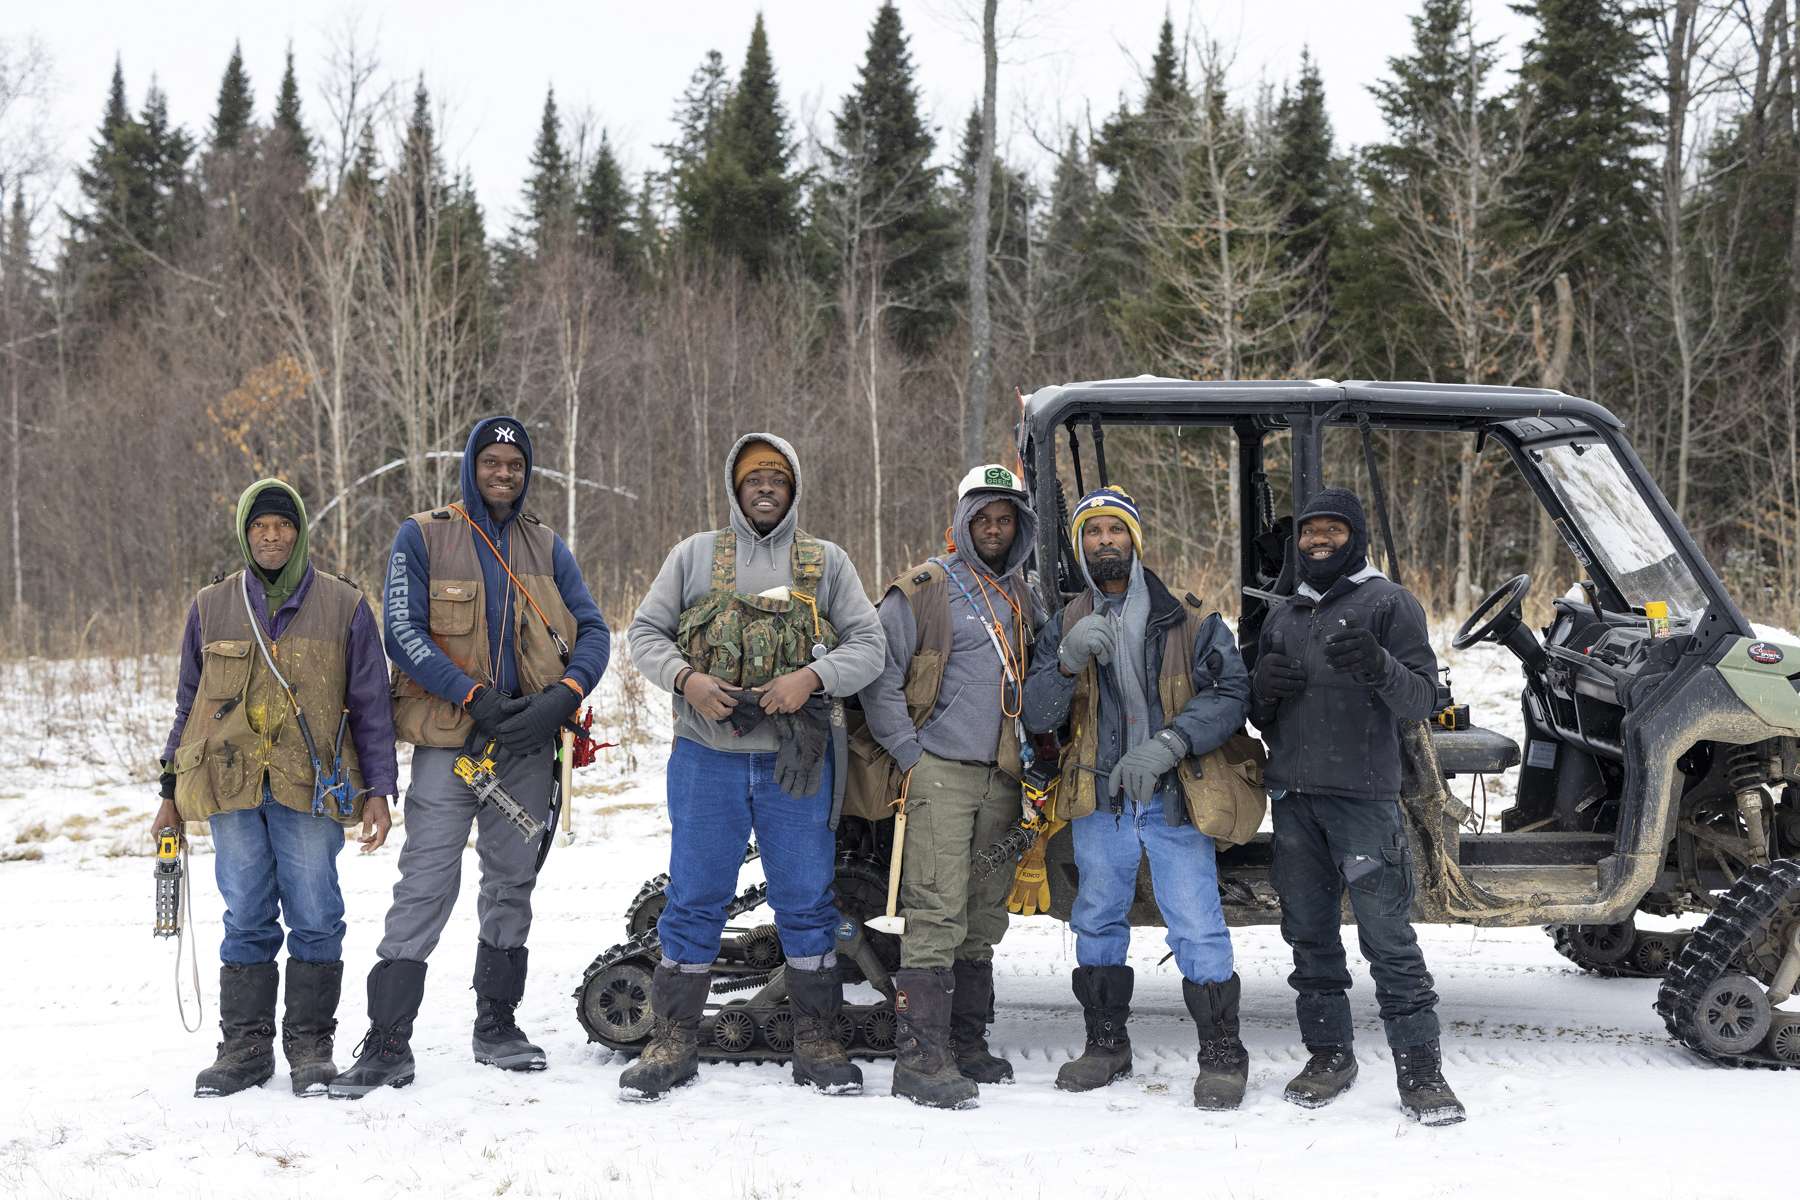 art of the crew, consistenting of workers from Jamaica, poses for a photo before heading into the field for the first day of tapping in early January. Photo by Mike Lynch